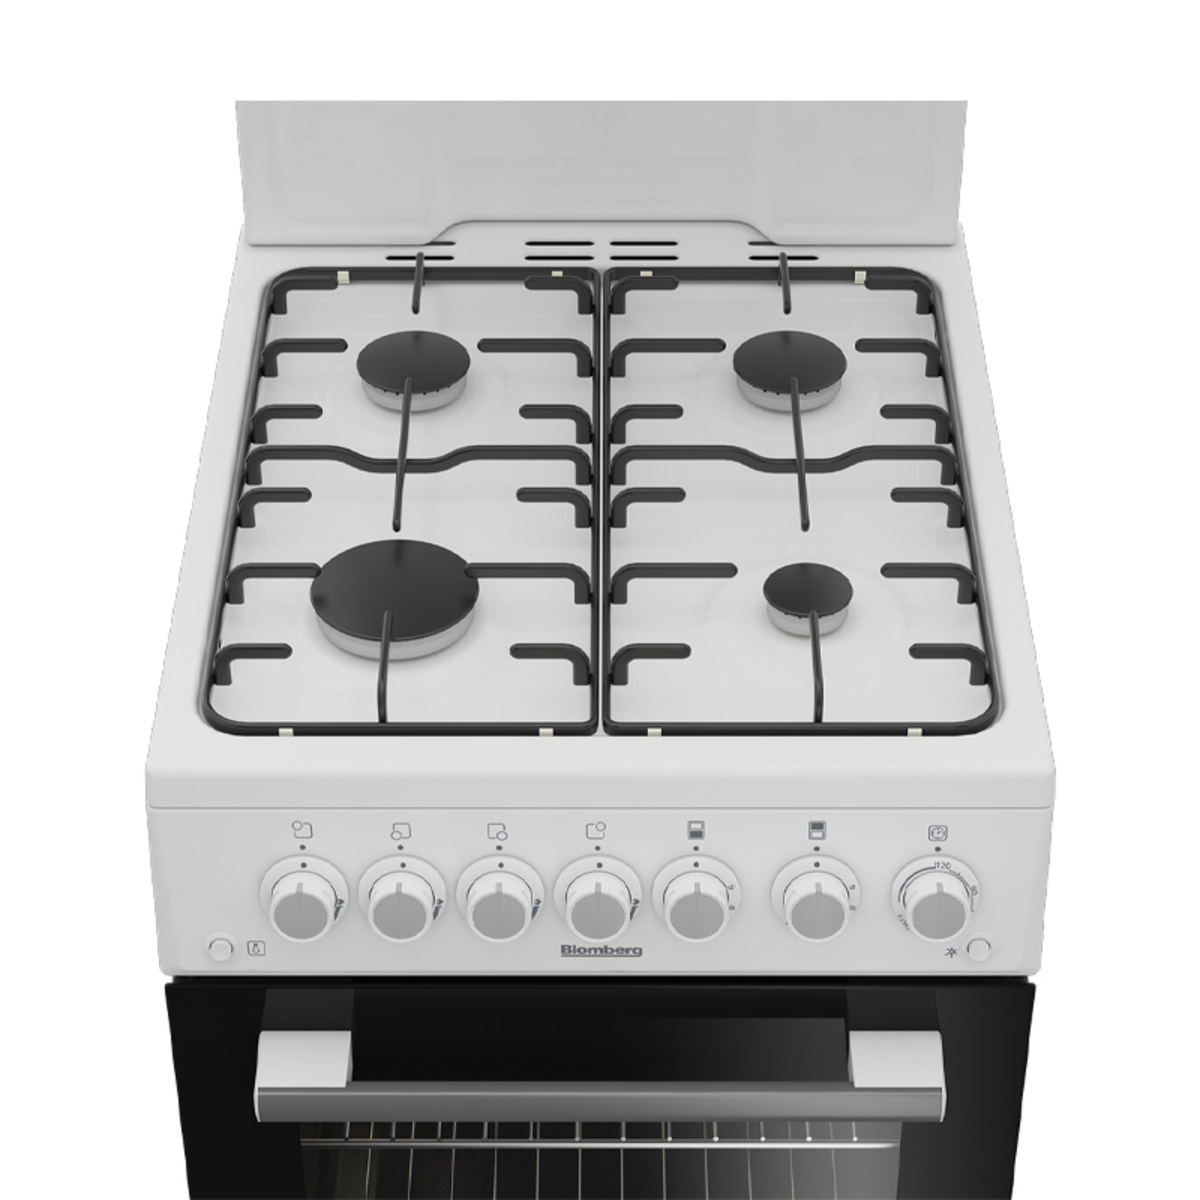 Image of Blomberg GGS9151W 50cm Single Oven Gas Cooker in White